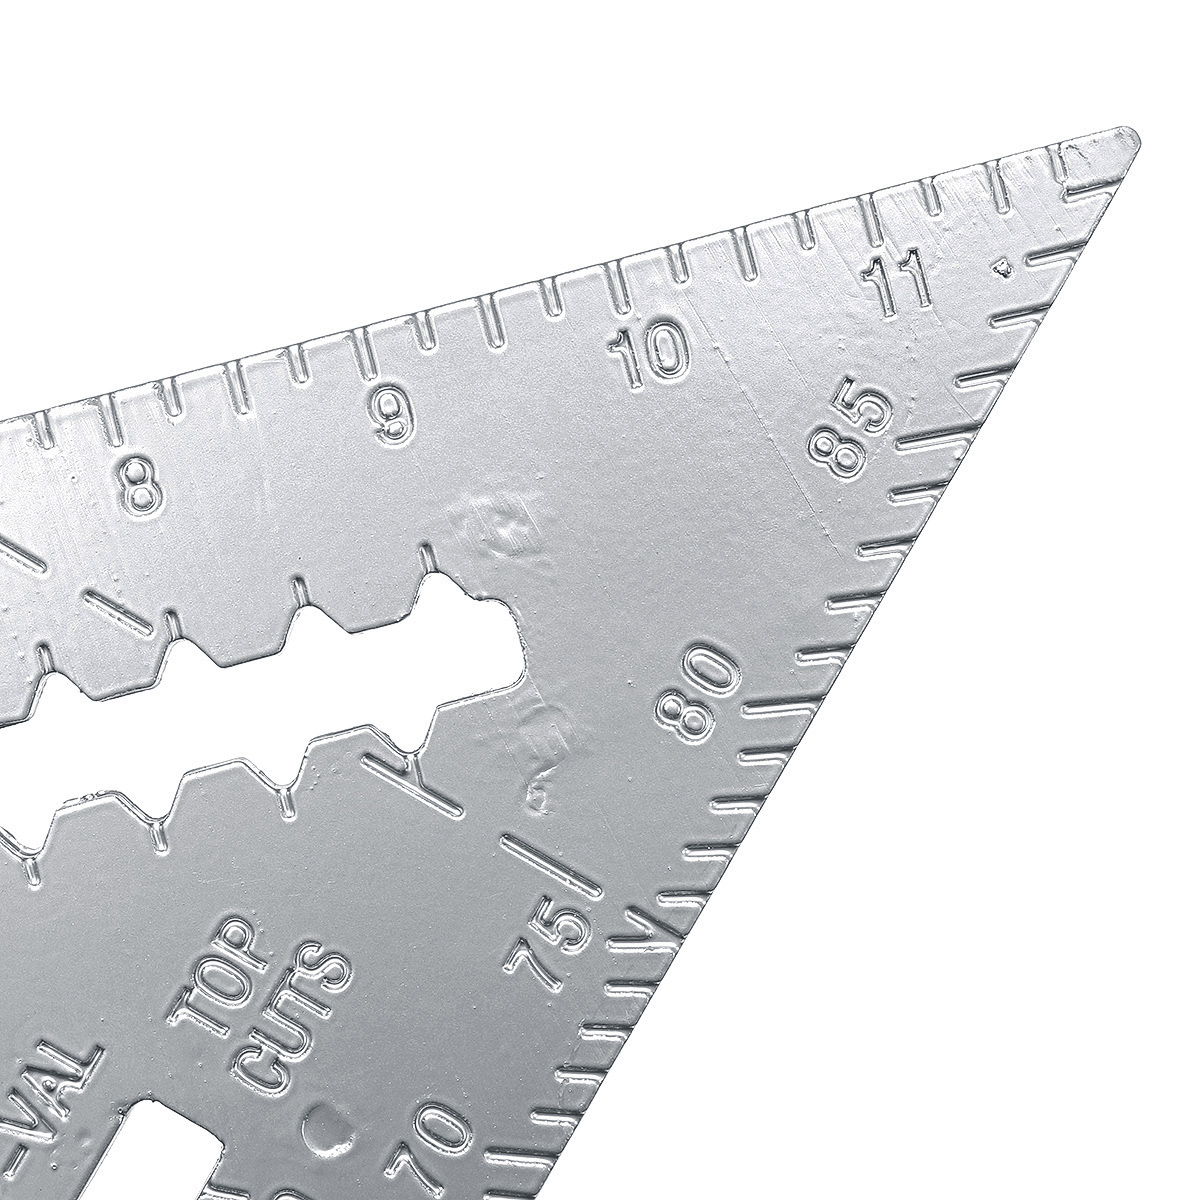 12inch-Aluminum-Alloy-Right-Angle-Triangle-Ruler-Protractor-Framing-Measuring-Tools-1597414-5